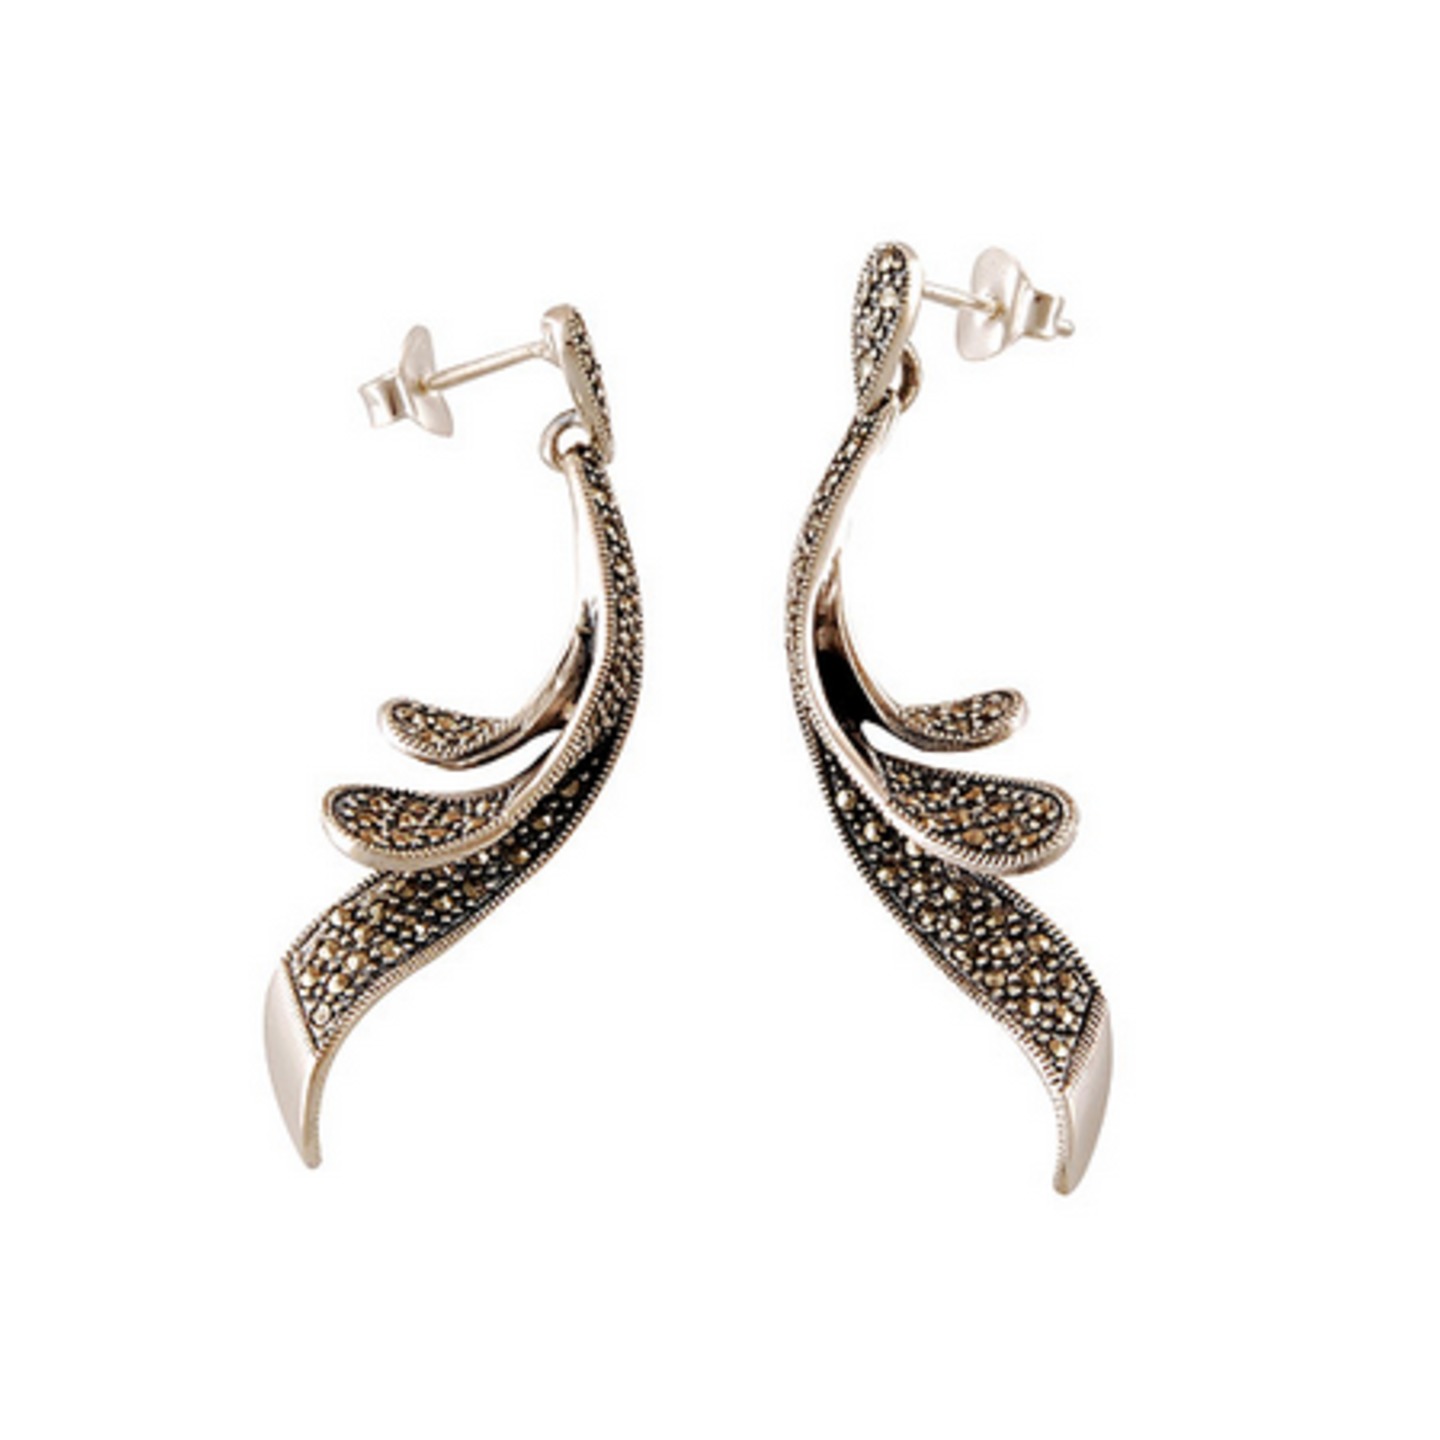 The Layers Marcasite Silver Earrings